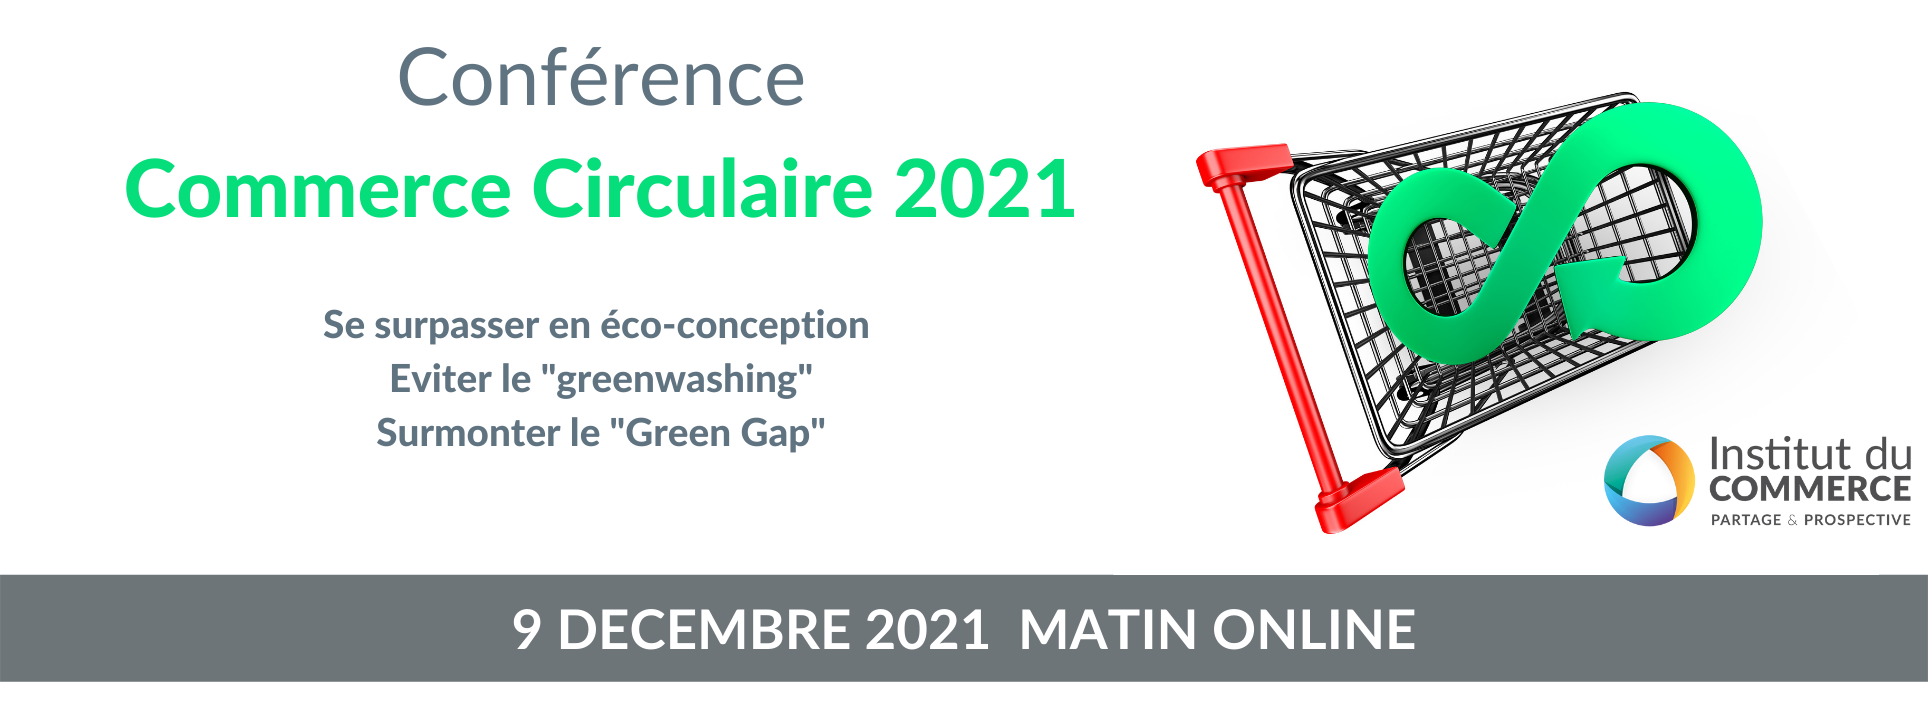 Commerce Circulaire 2021